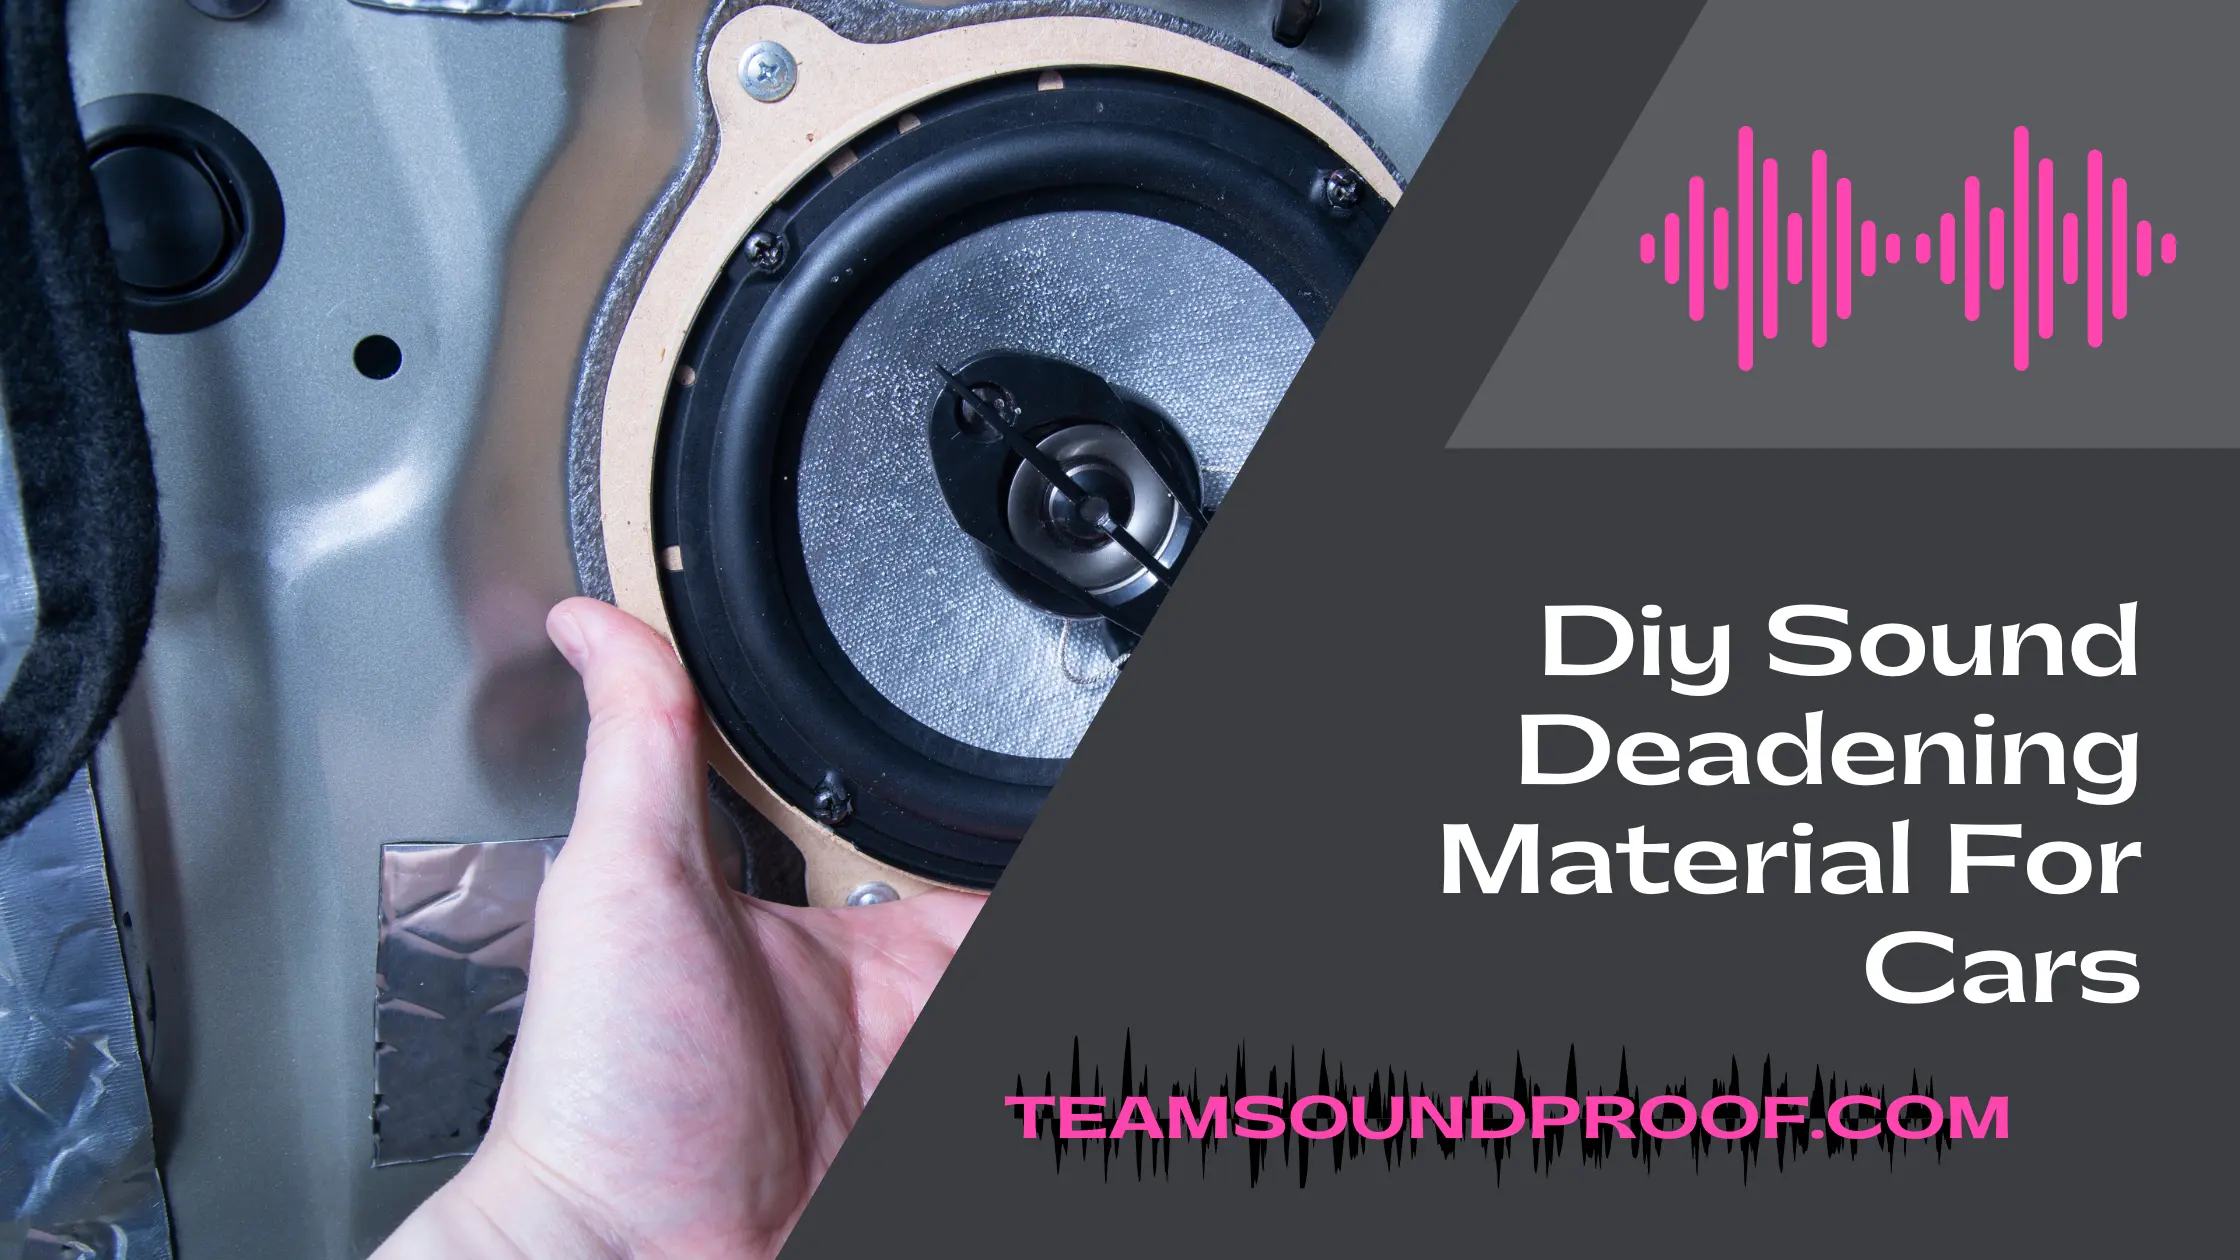 Diy Sound Deadening Material For Cars? Step by Step Guide